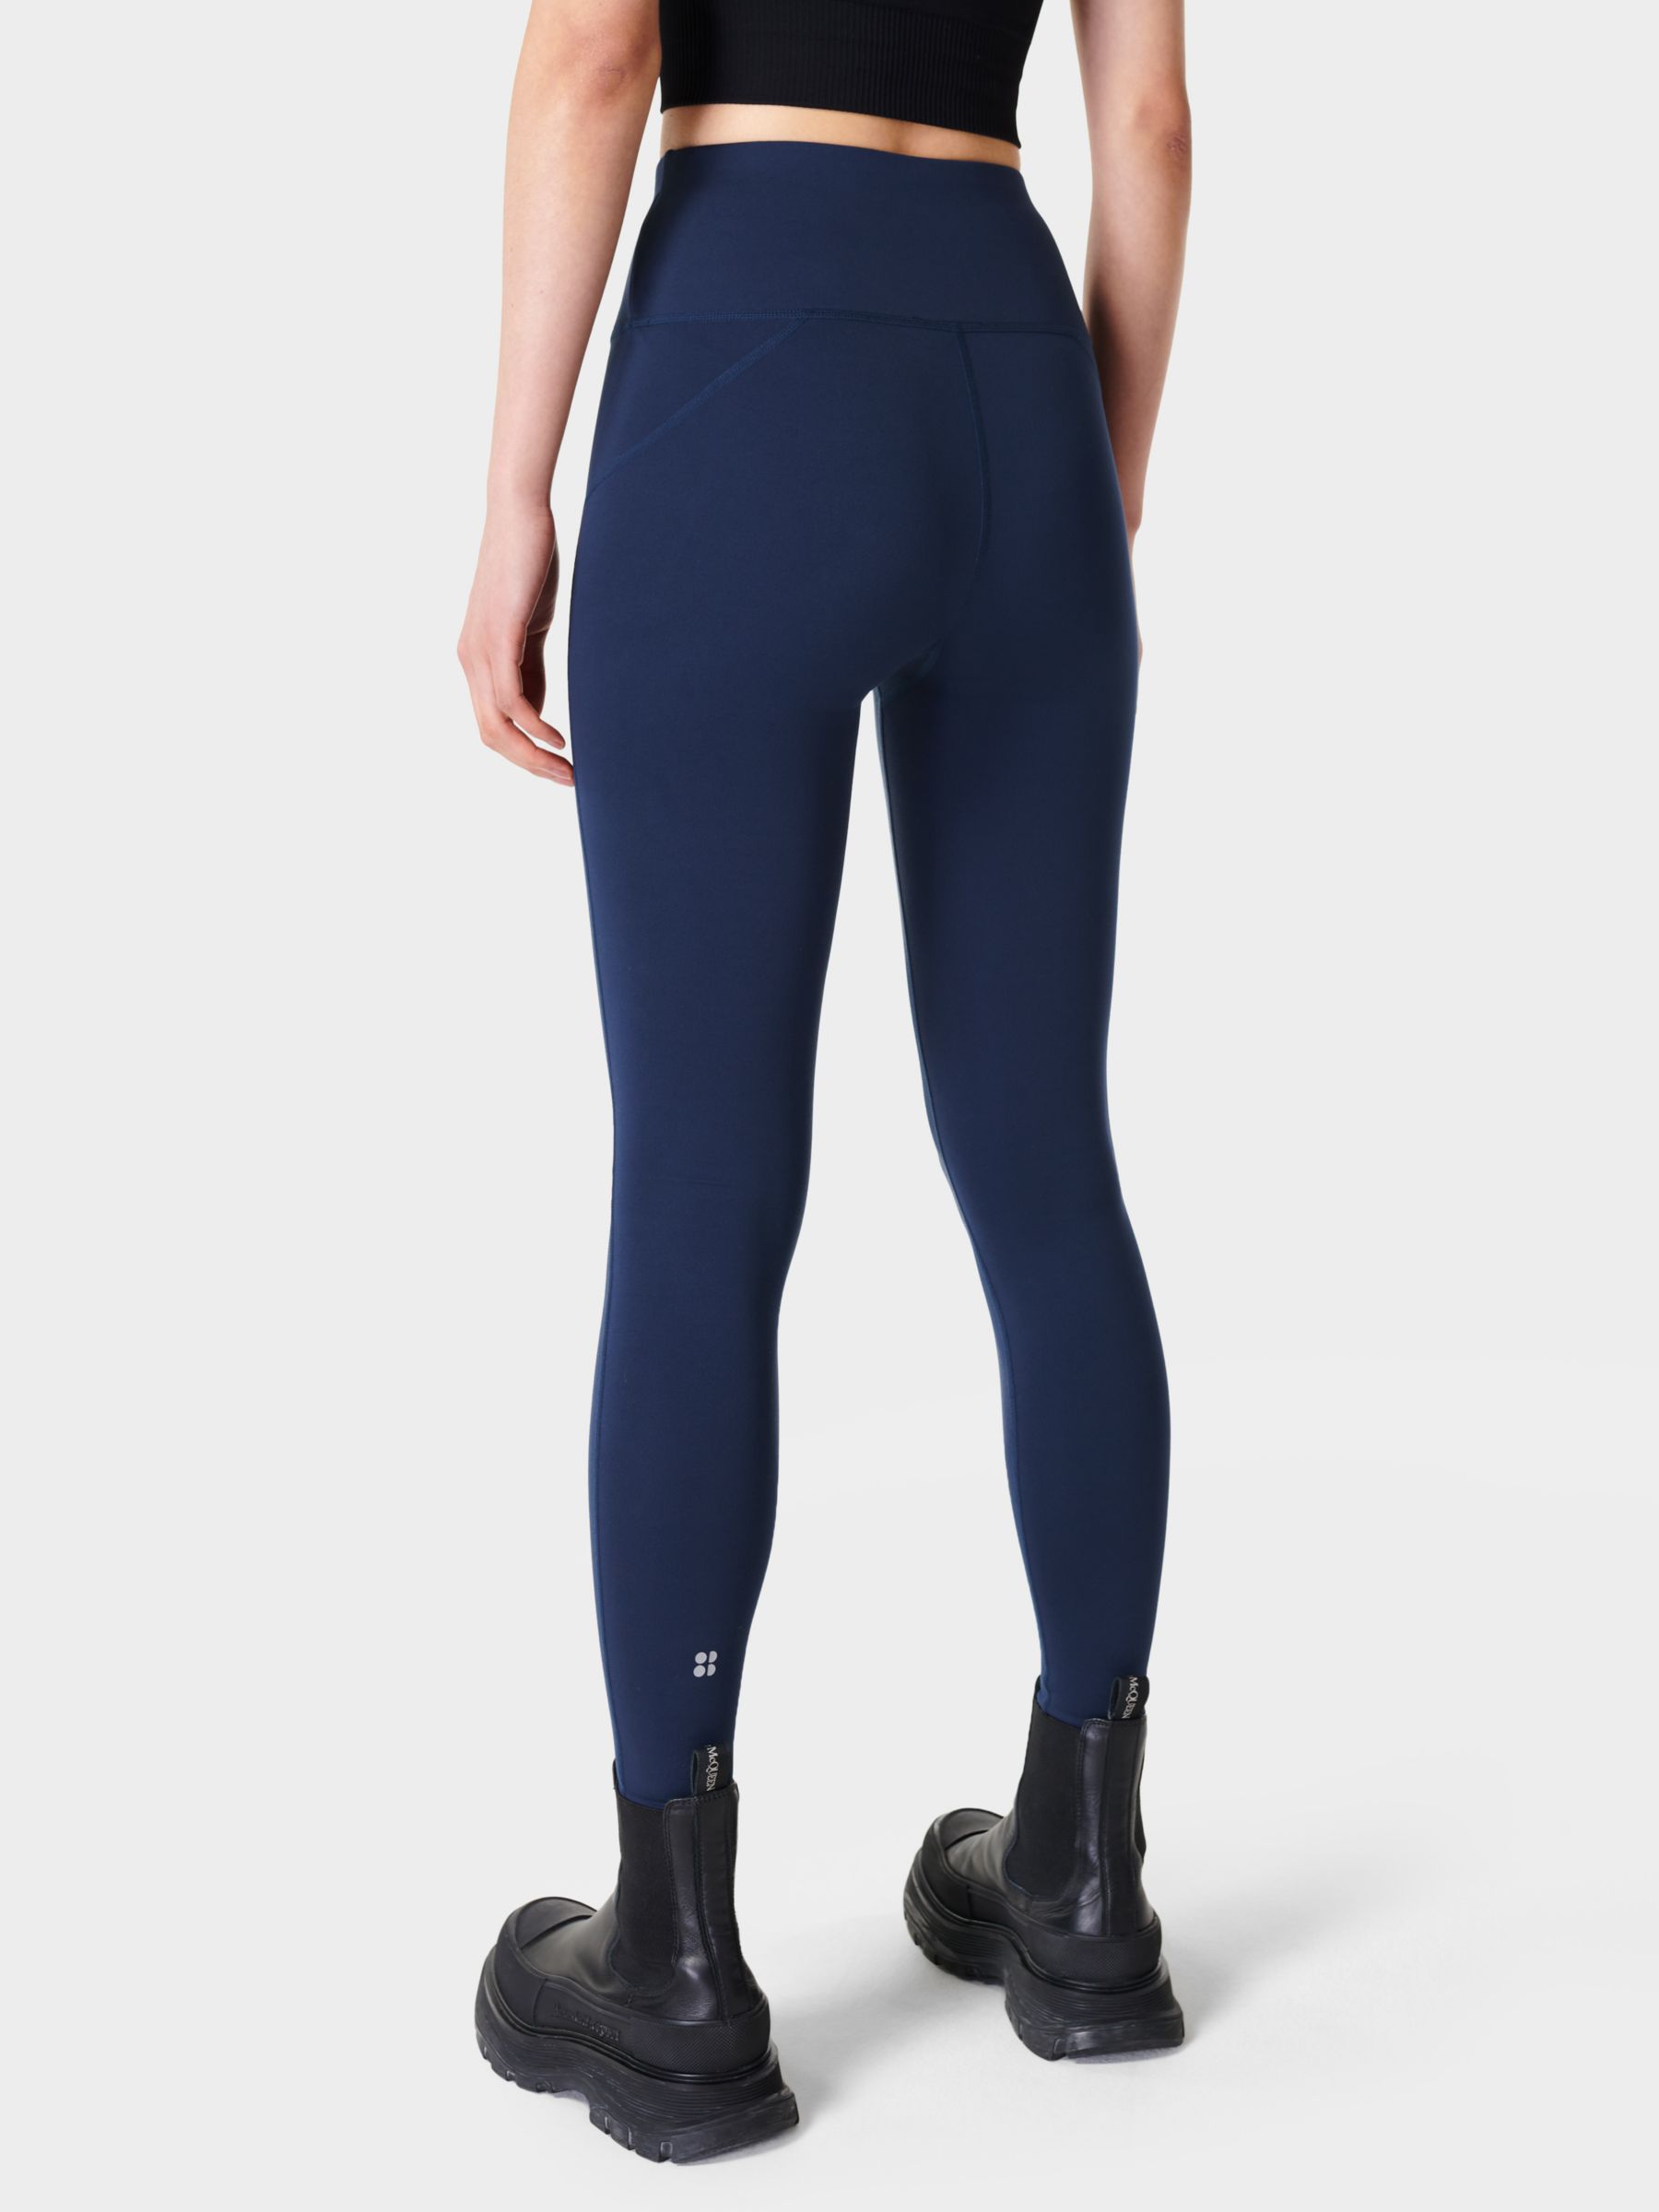 Buy Sweaty Betty All Day Leggings Online at johnlewis.com